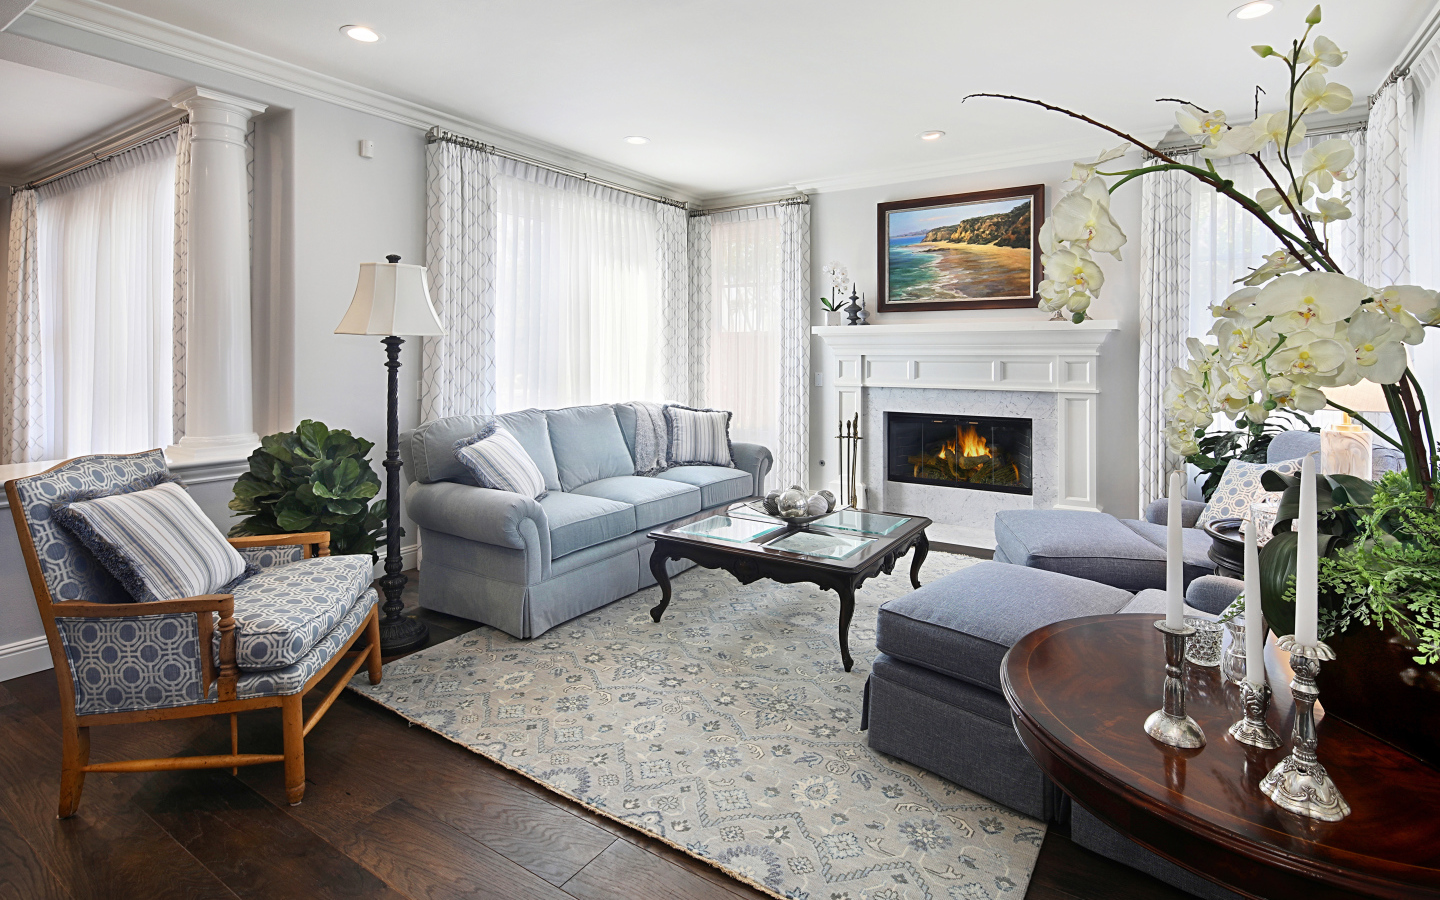 Large living room with a fireplace and fresh flowers